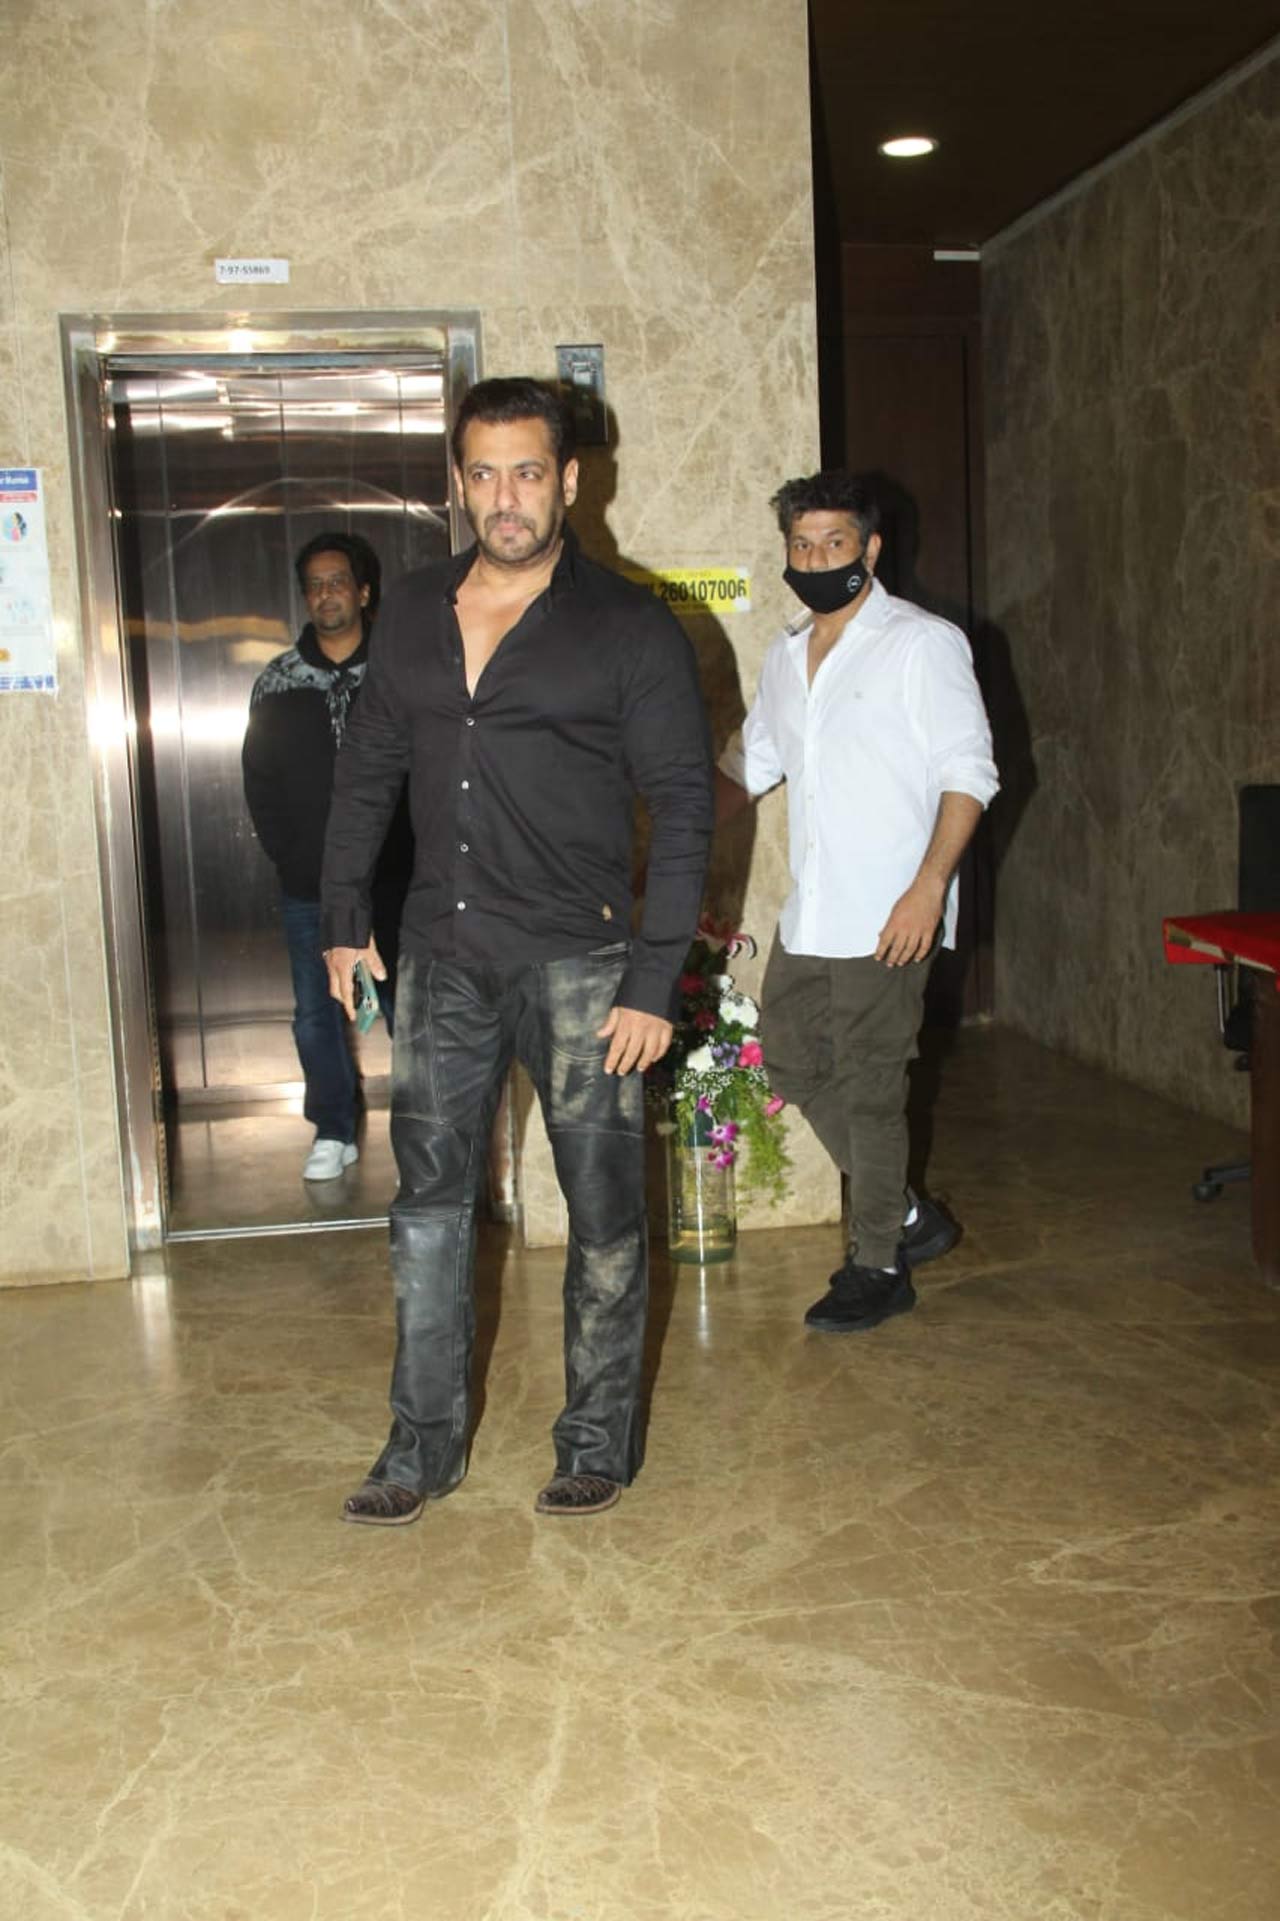 Salman Khan attended Ramesh Taurani's Diwali party and posed for shutterbugs as soon as he arrived at his residence. The actor is currently busy with Antim: The Final Truth and Tiger 3.